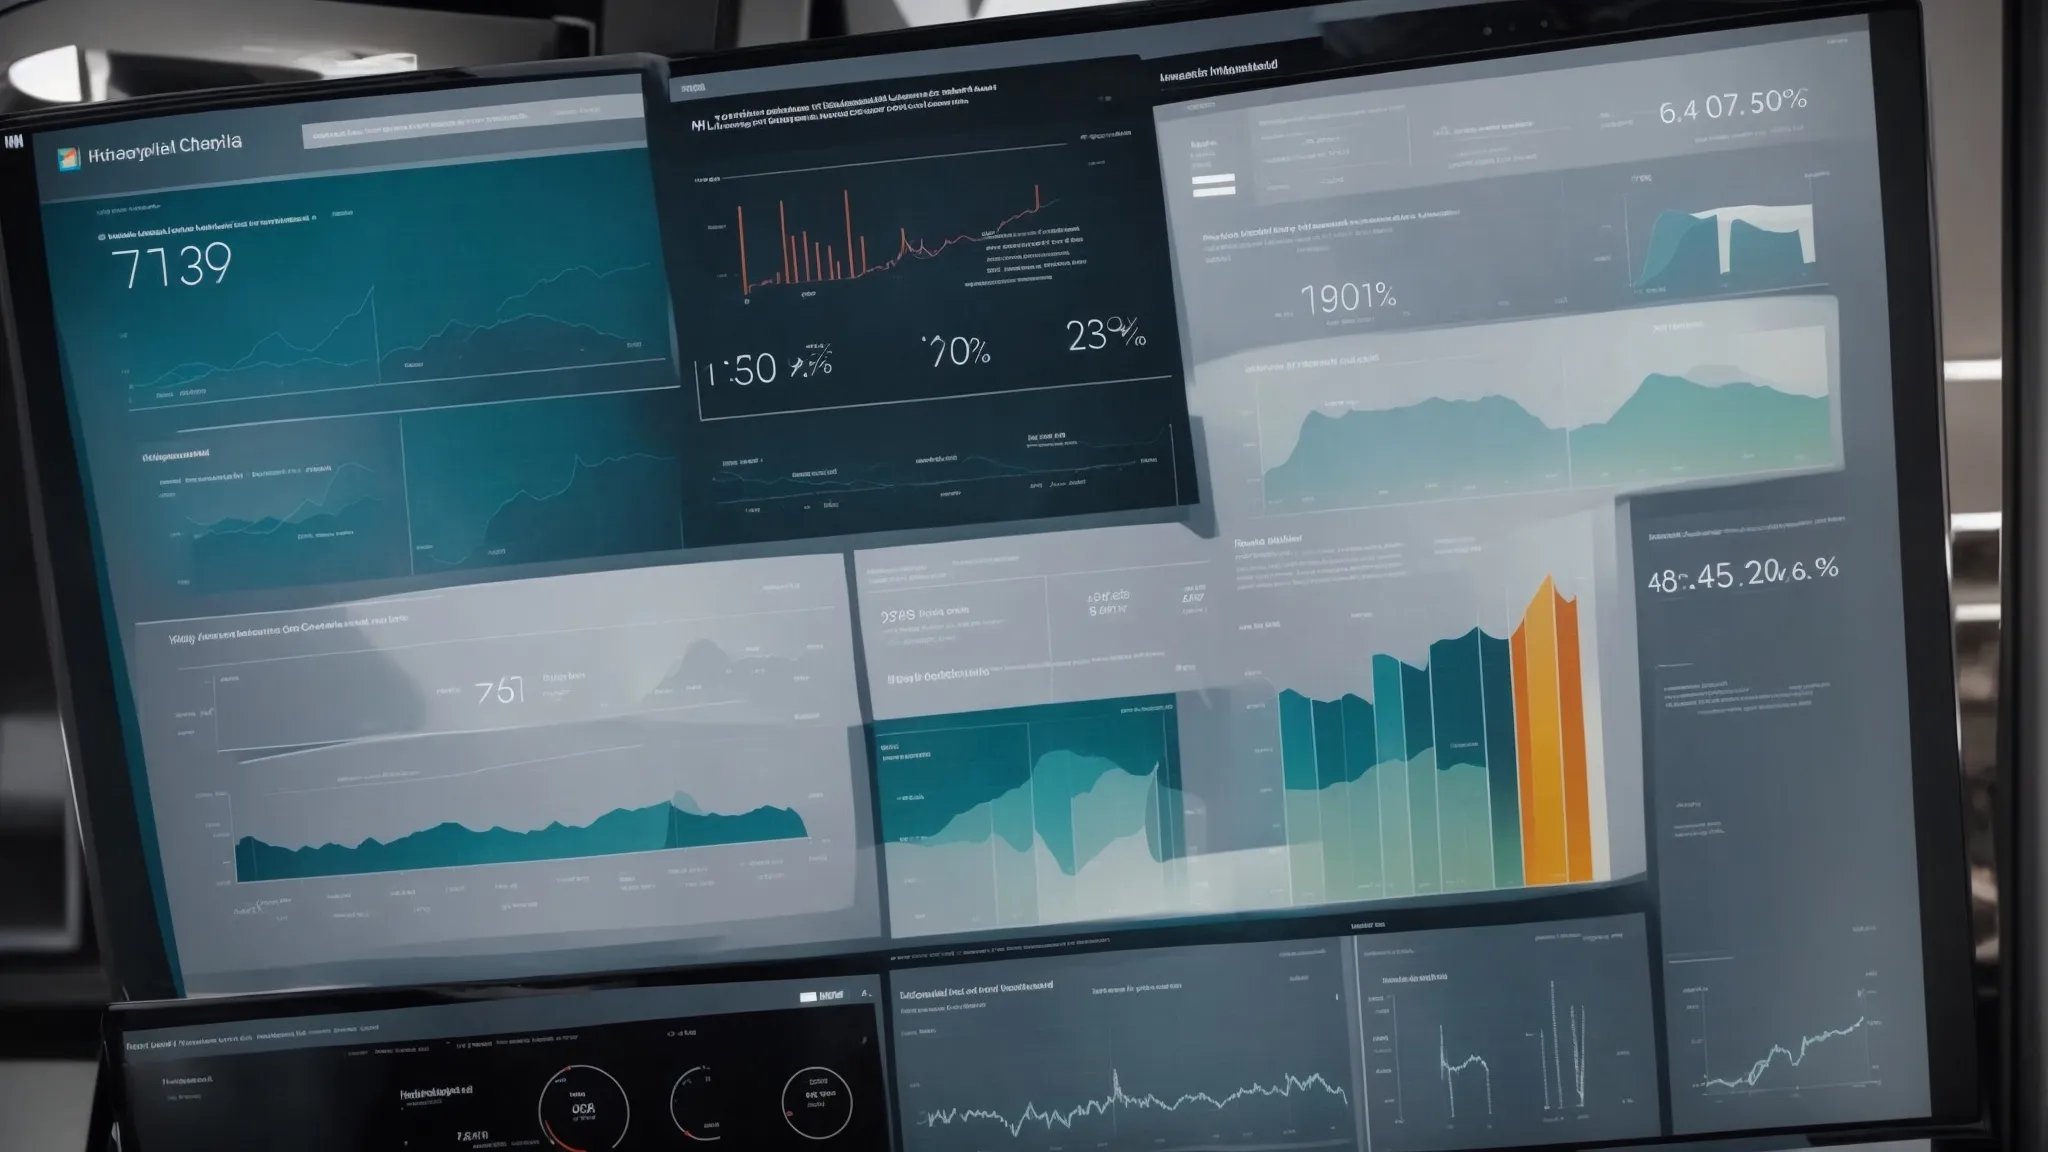 charts and graphics interplay on a screen, illustrating complex analytics transformed into a user-friendly infographic.